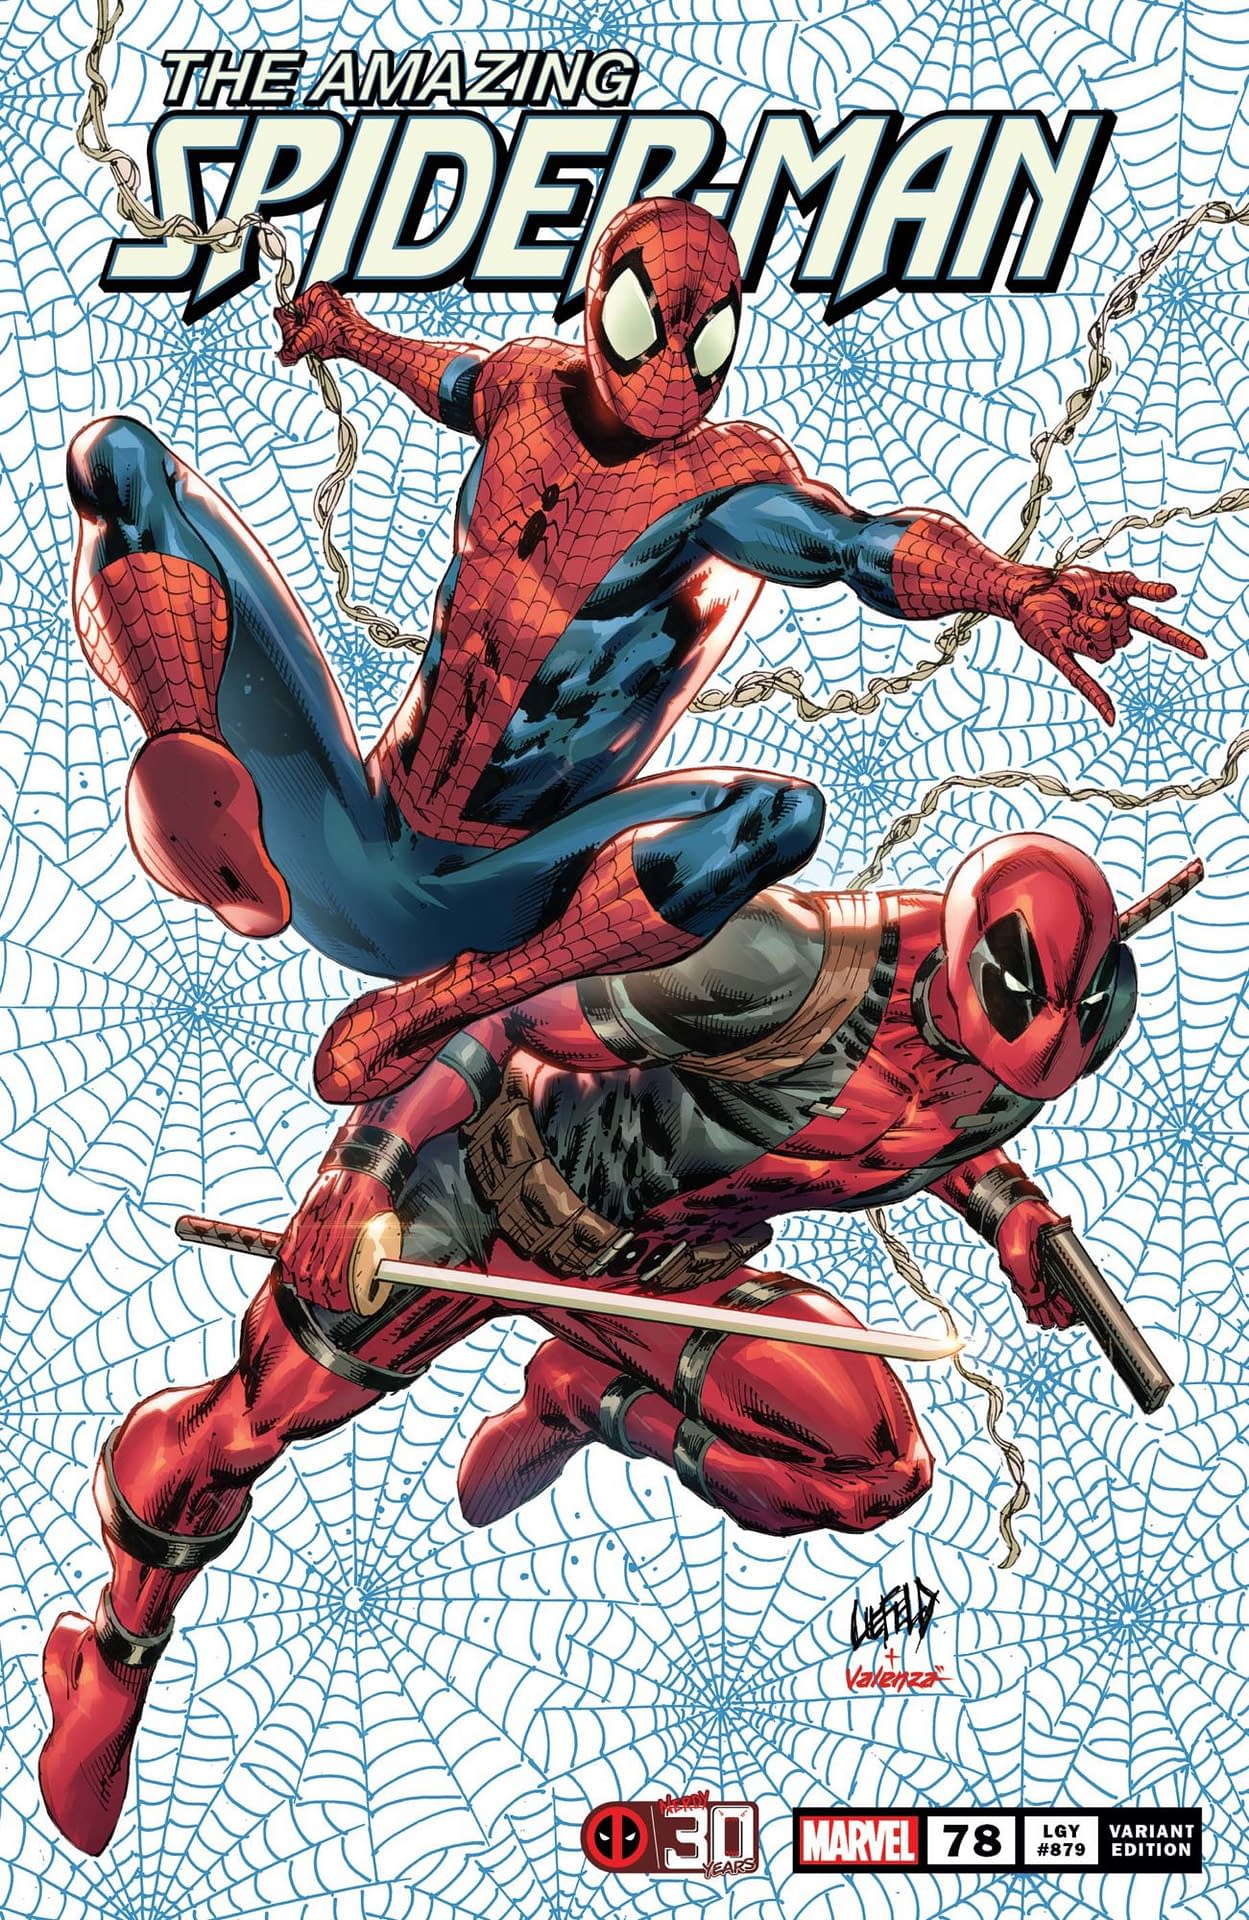 Marvel Mistakenly Uses Rob Liefeld Spider-Man & Deadpool Cover Twice